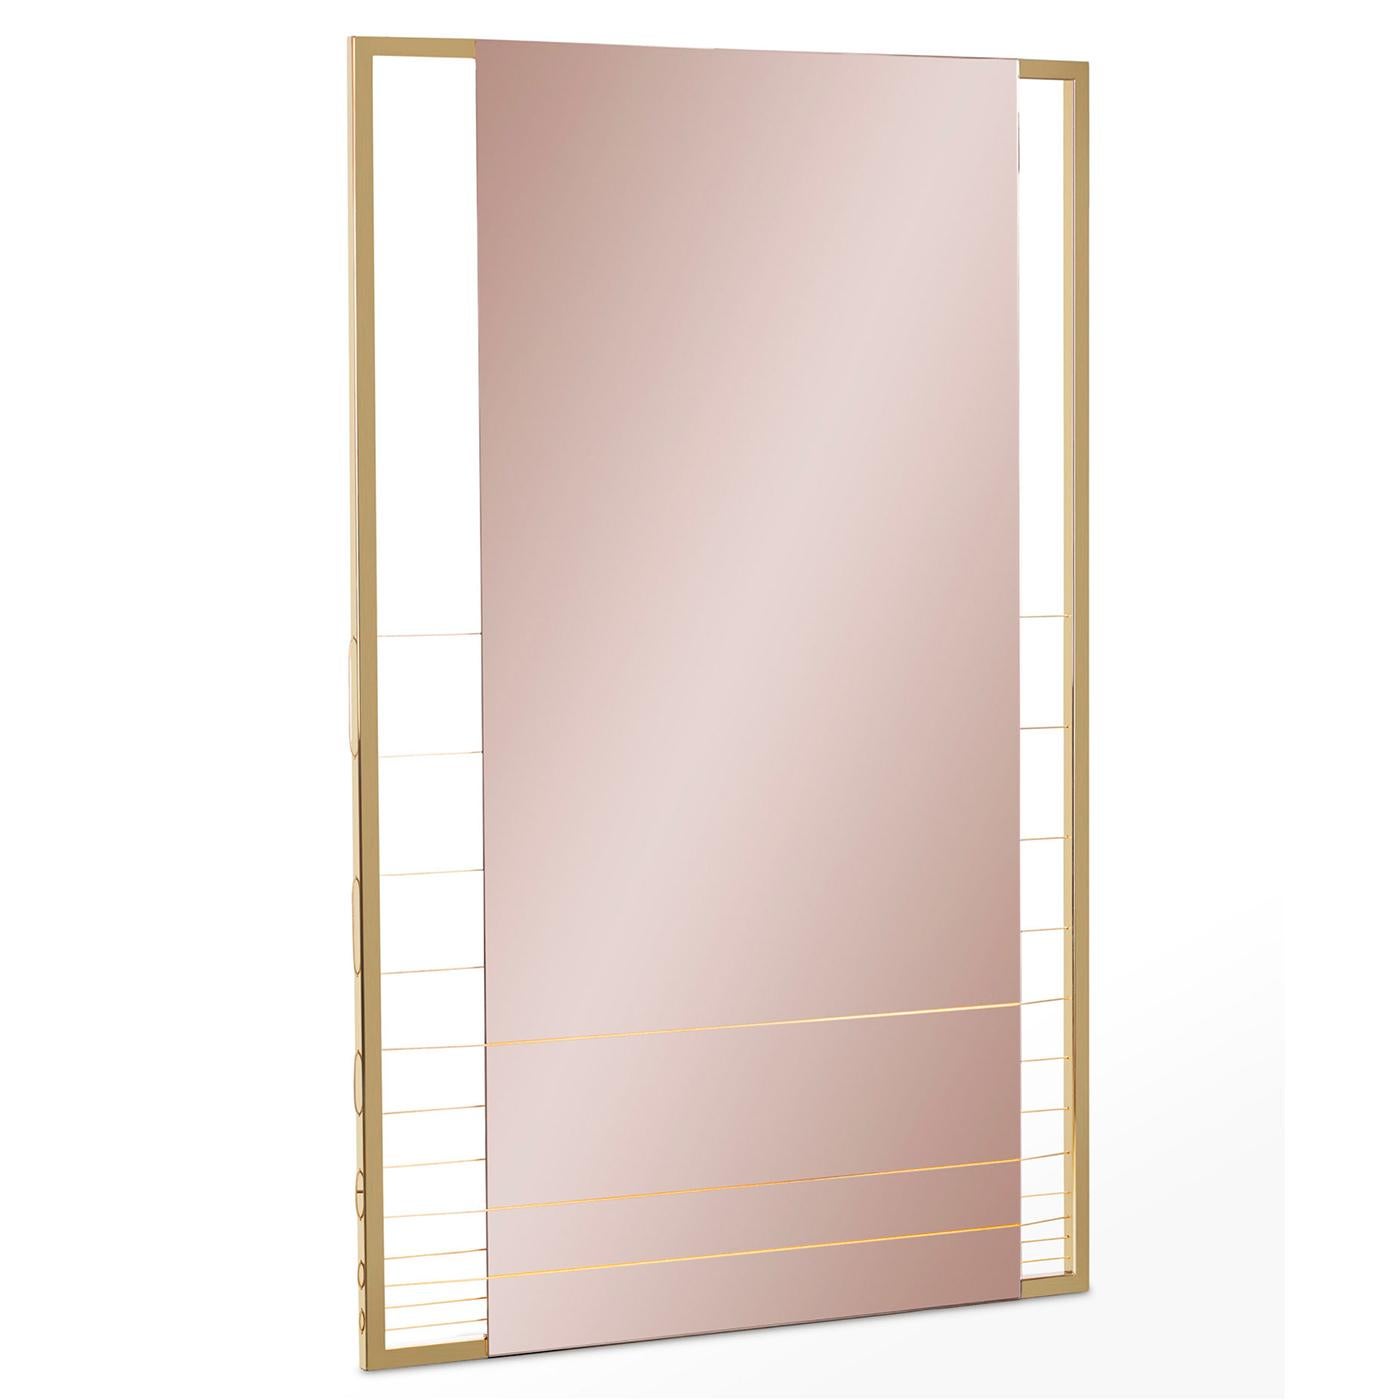 Entirely assembled and finished by hand, this remarkable wall-mounted mirror designed by Ziad Alonaizy is inspired by the IDEA of protection of the Greek mythology's aegis. The pink-tinted mirror is seemingly suspended inside a stainless steel frame